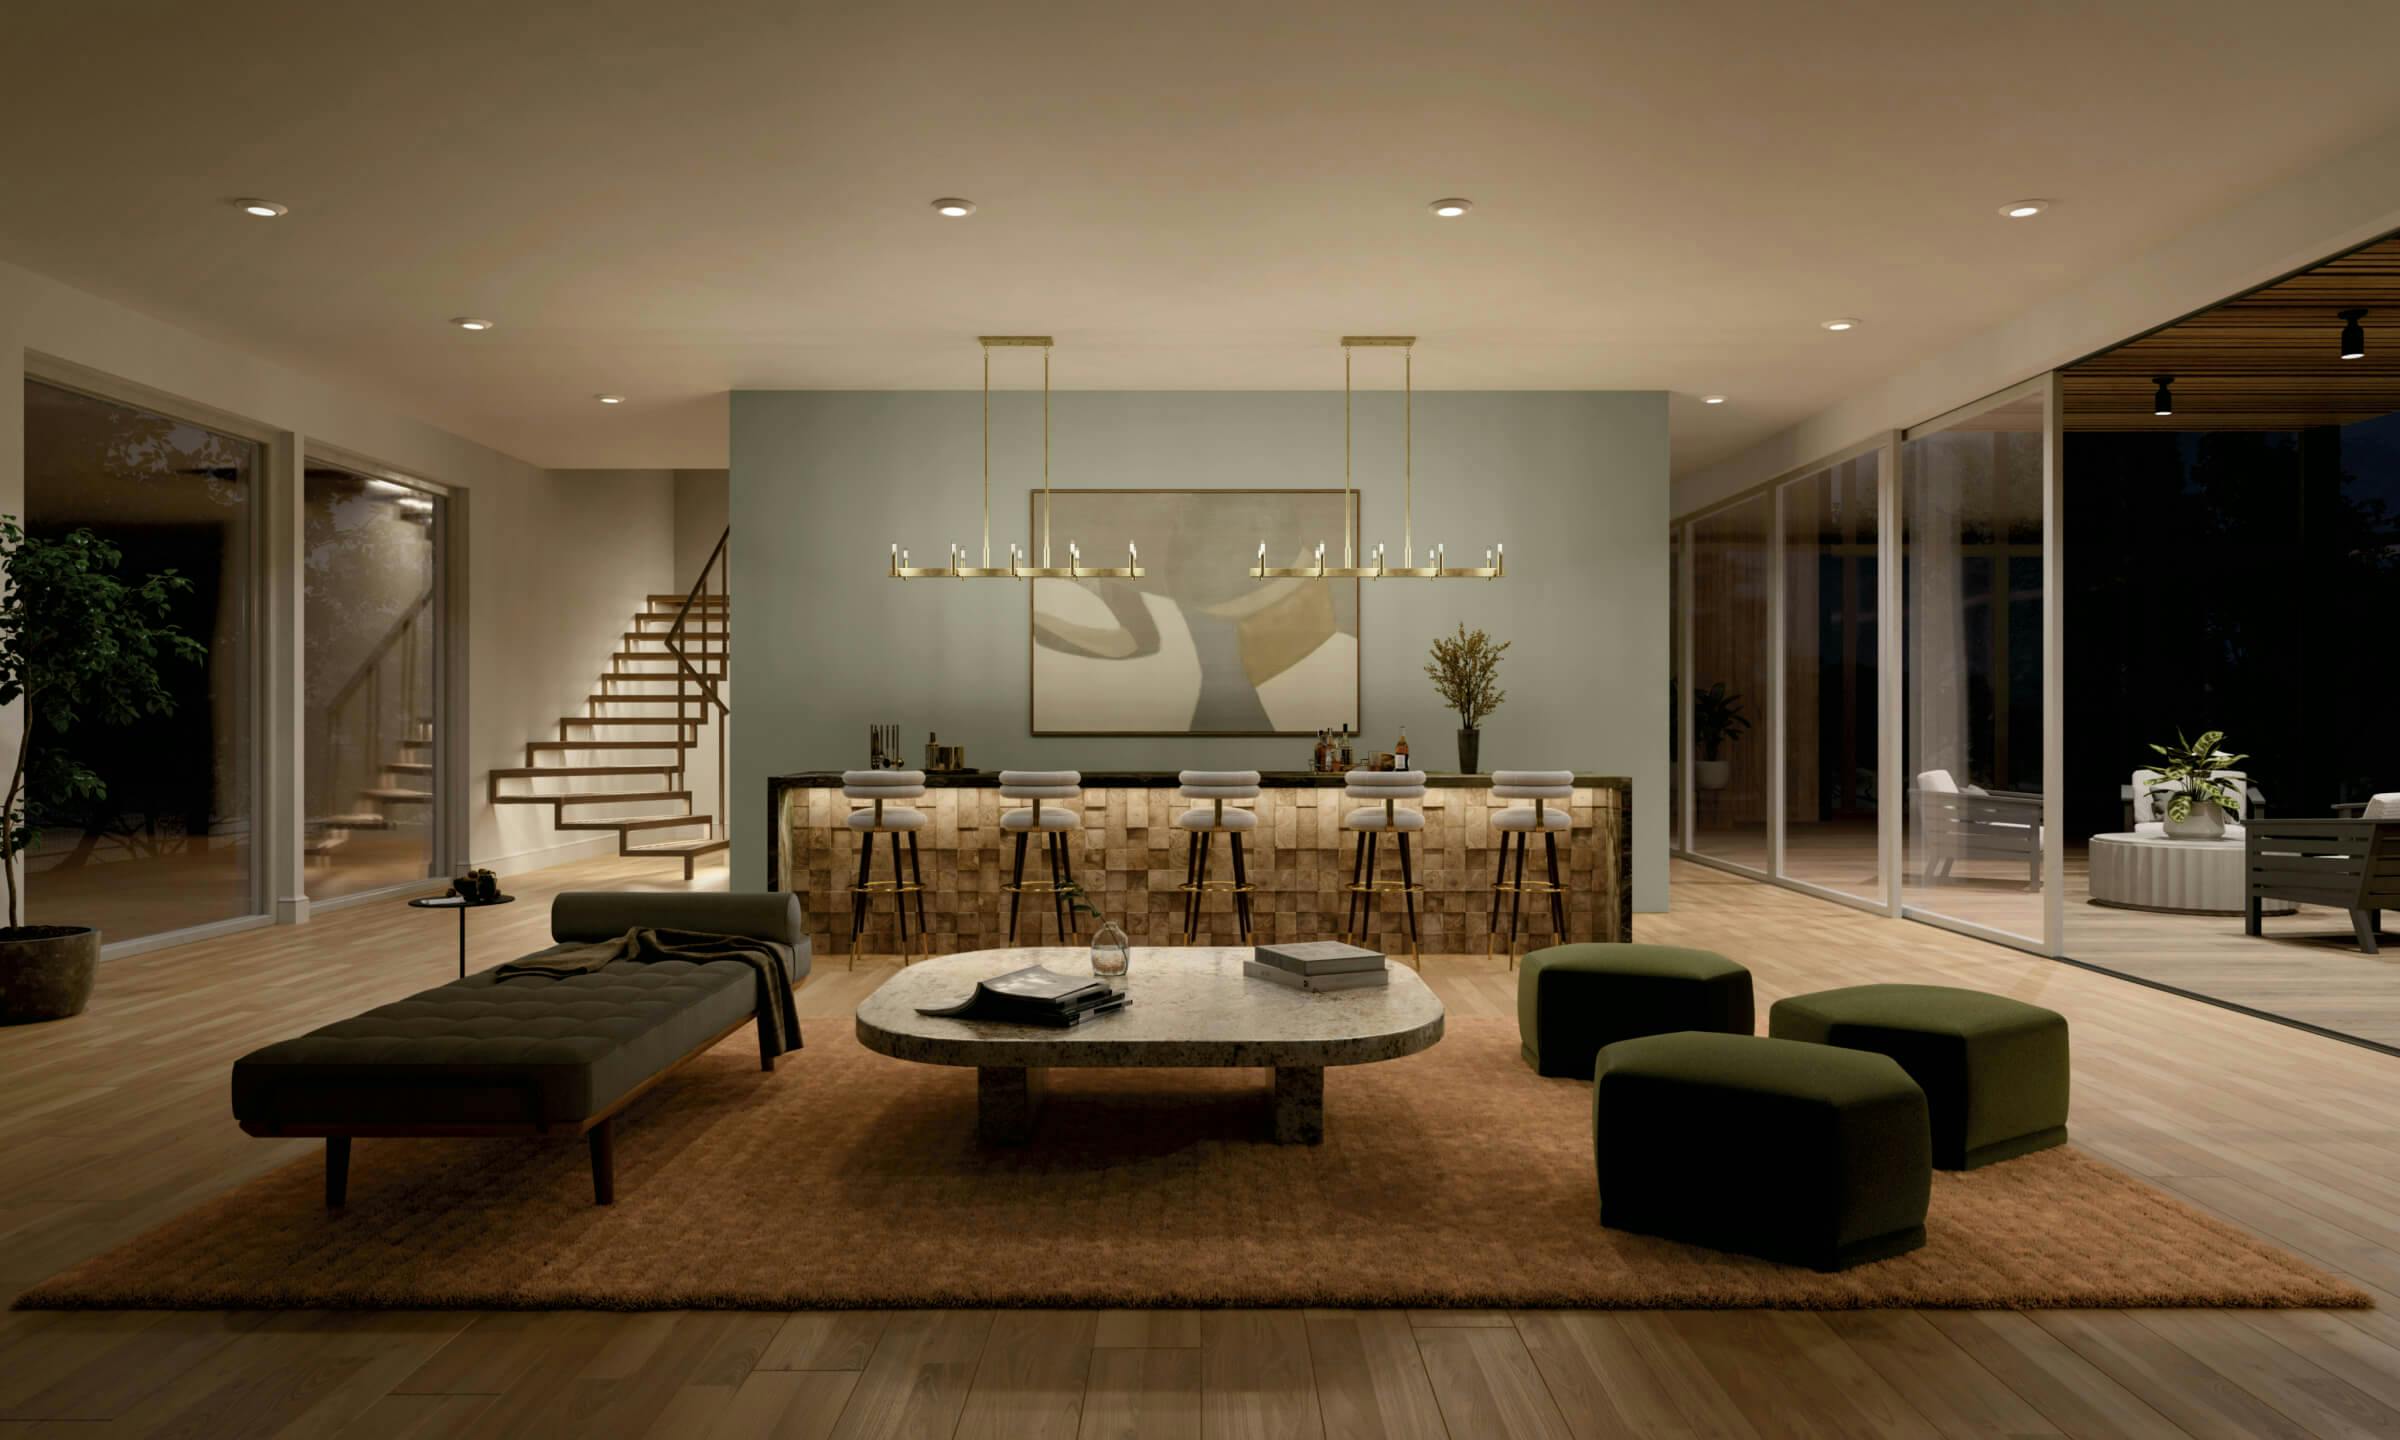 Living room with bar in background and two Erzo linear chandeliers in brushed natural brass